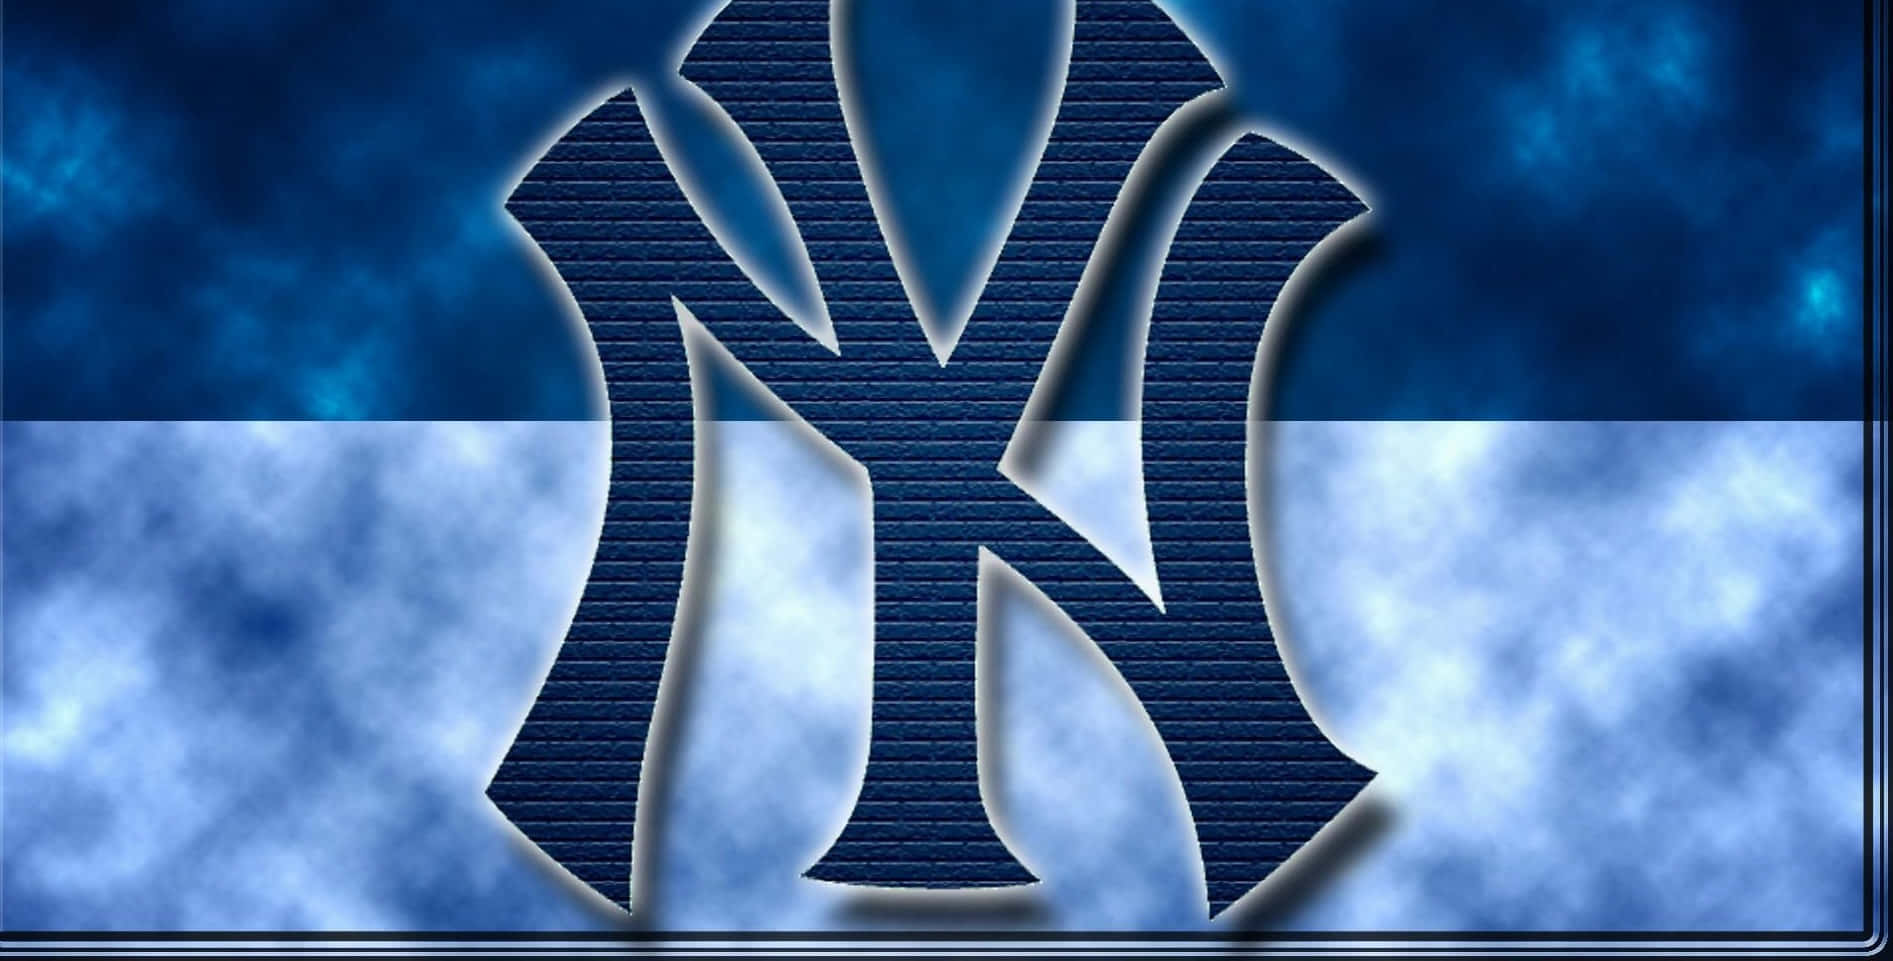 Download Yankees 1893 X 961 Background | Wallpapers.com